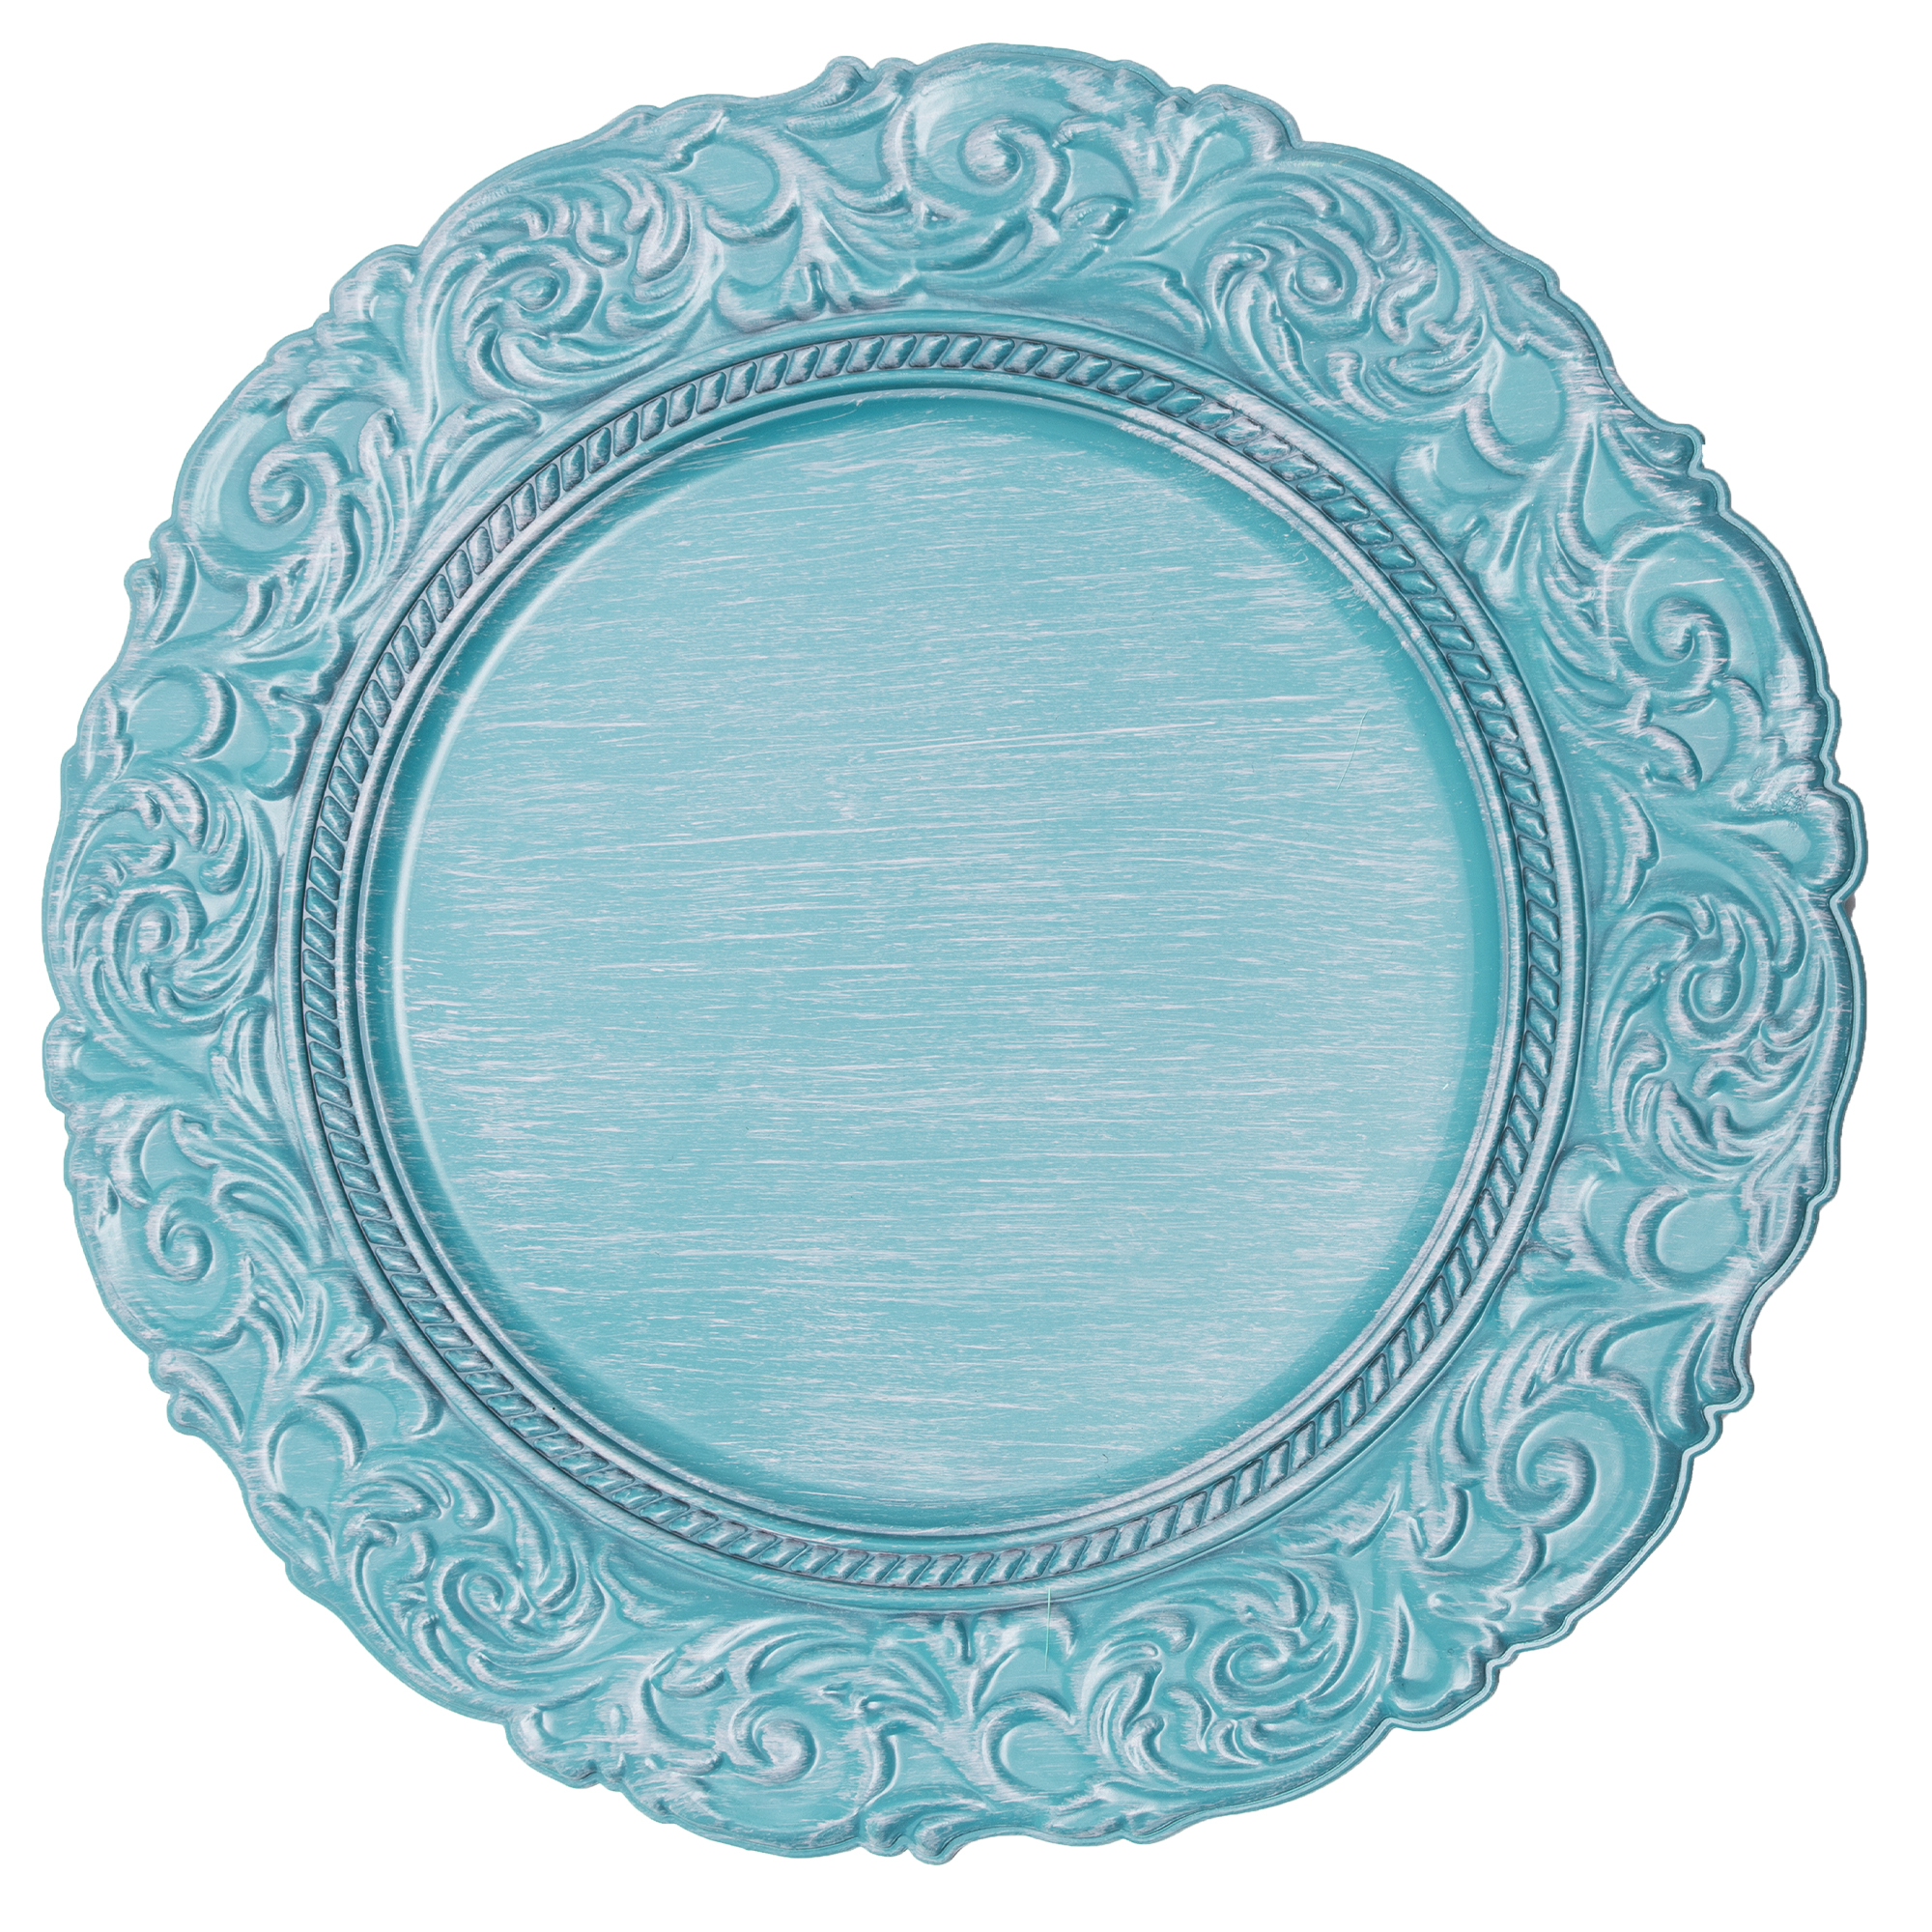 Antique Look Plastic Charger Plate 14" - Blue